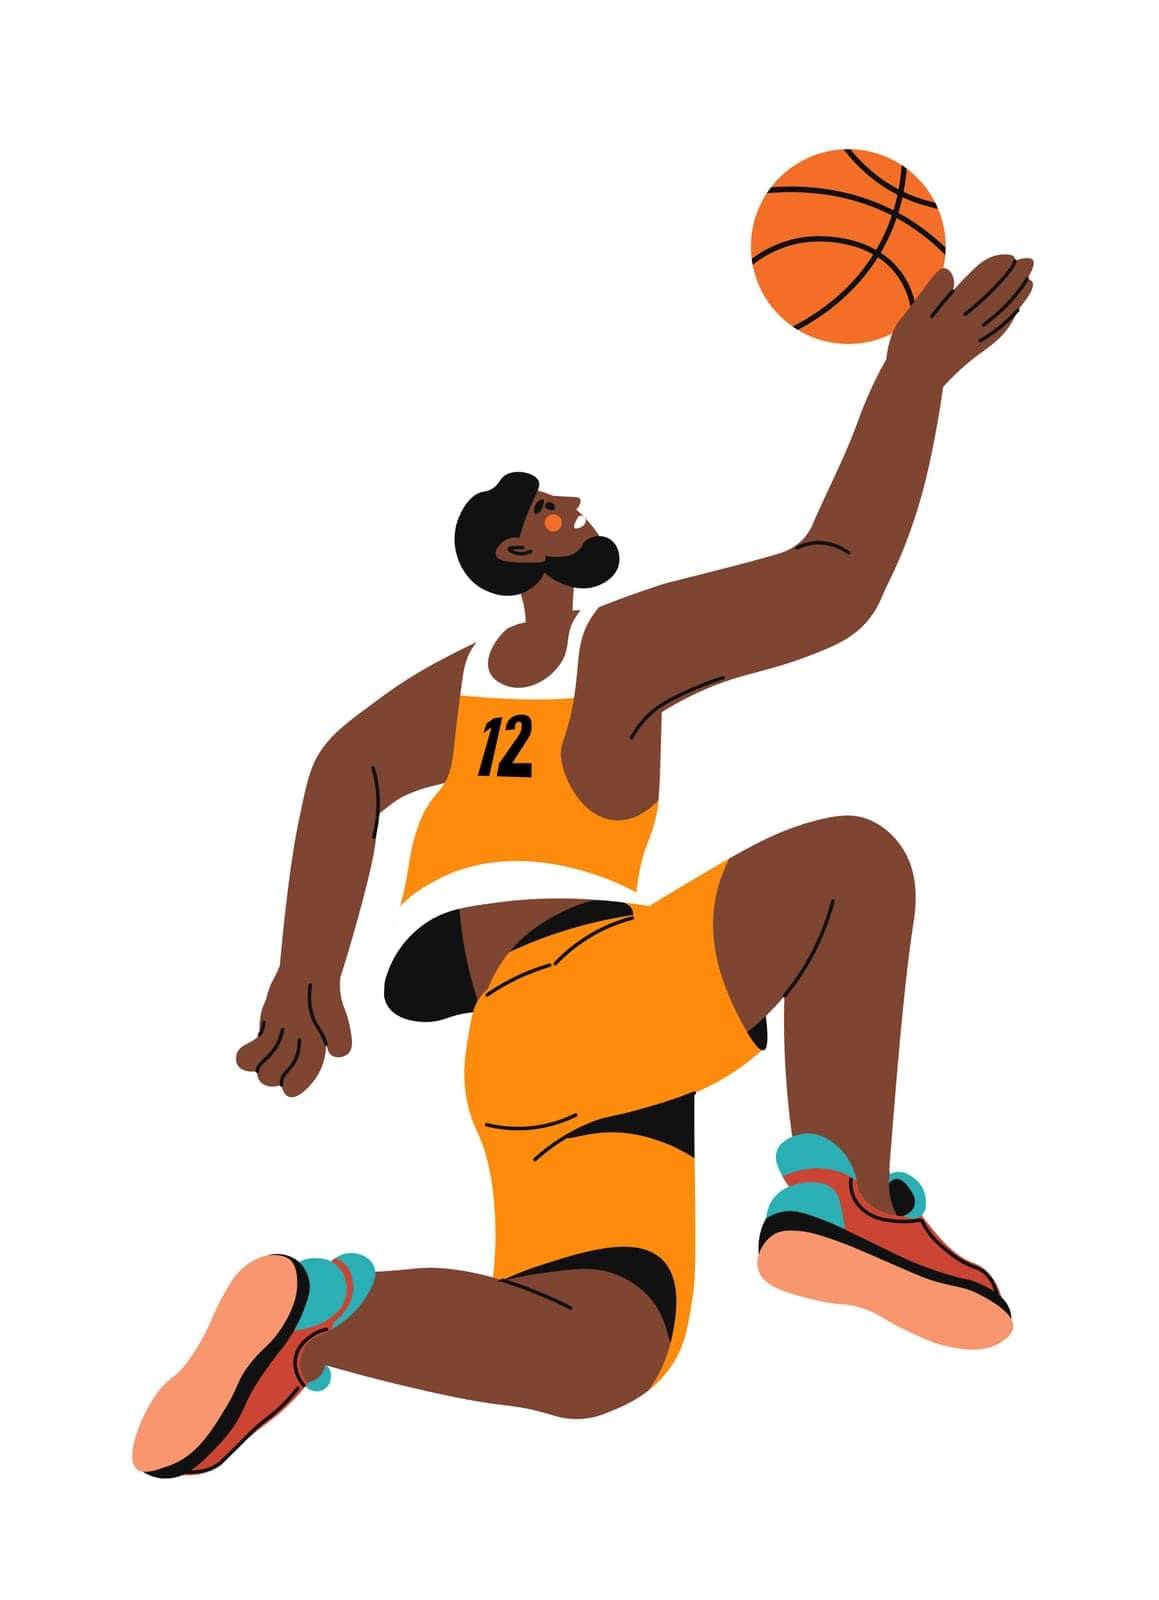 Basketball player throwing ball, isolated sportsman wearing uniform. Activities and leisure, hobbies of basketballer. Professional sports or competition, sporting event. Vector in flat style